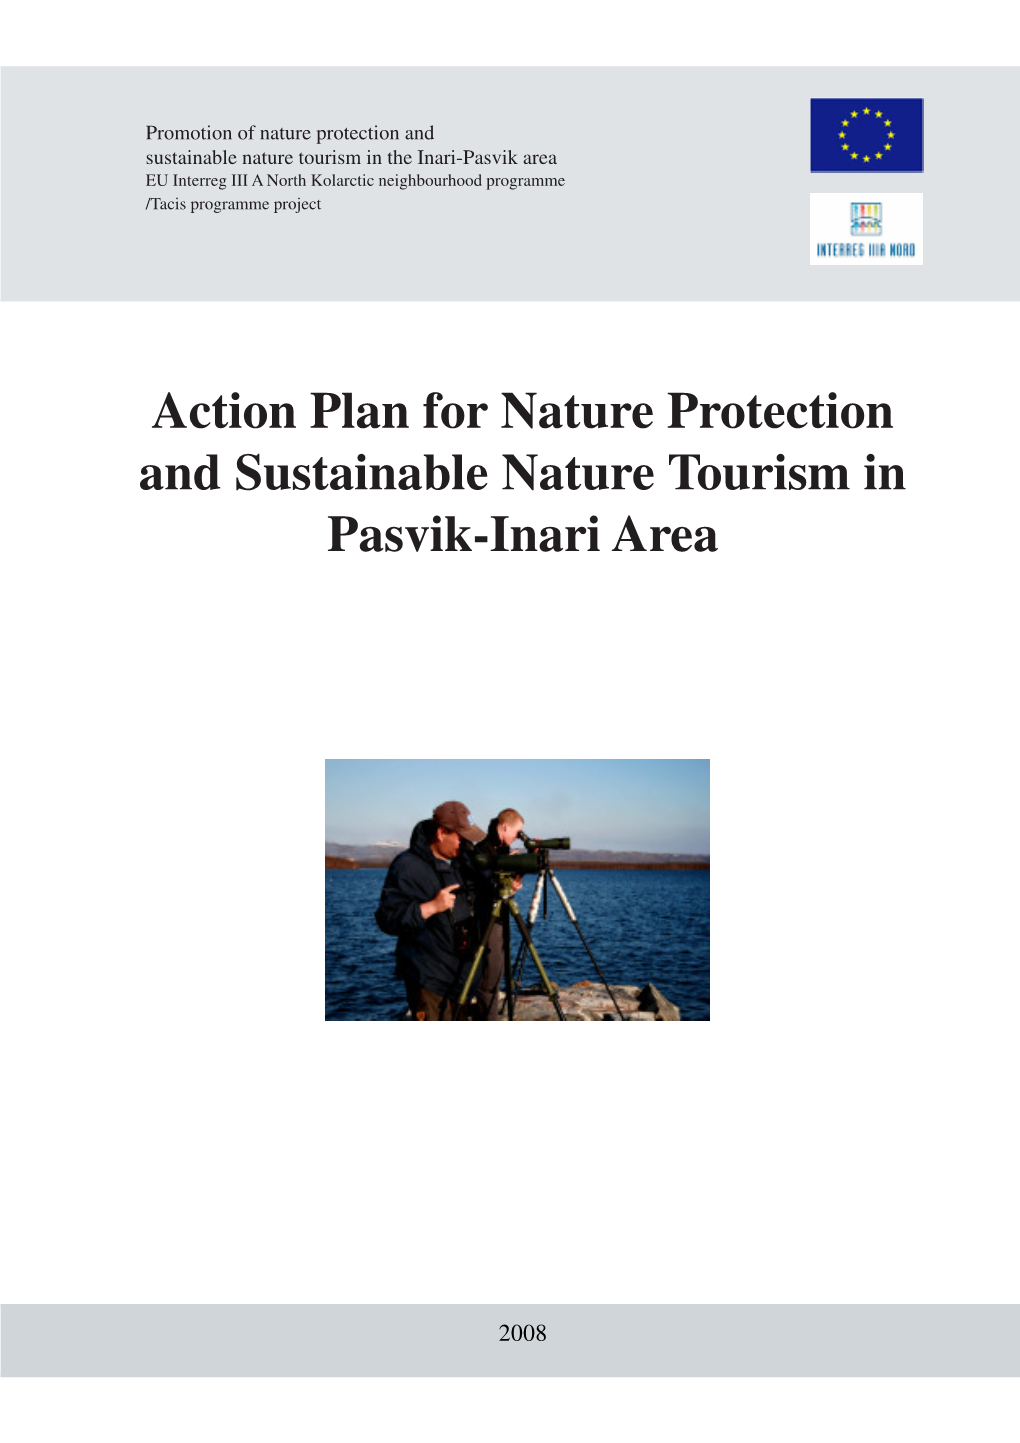 Action Plan for Nature Protection and Sustainable Nature Tourism in Pasvik-Inari Area